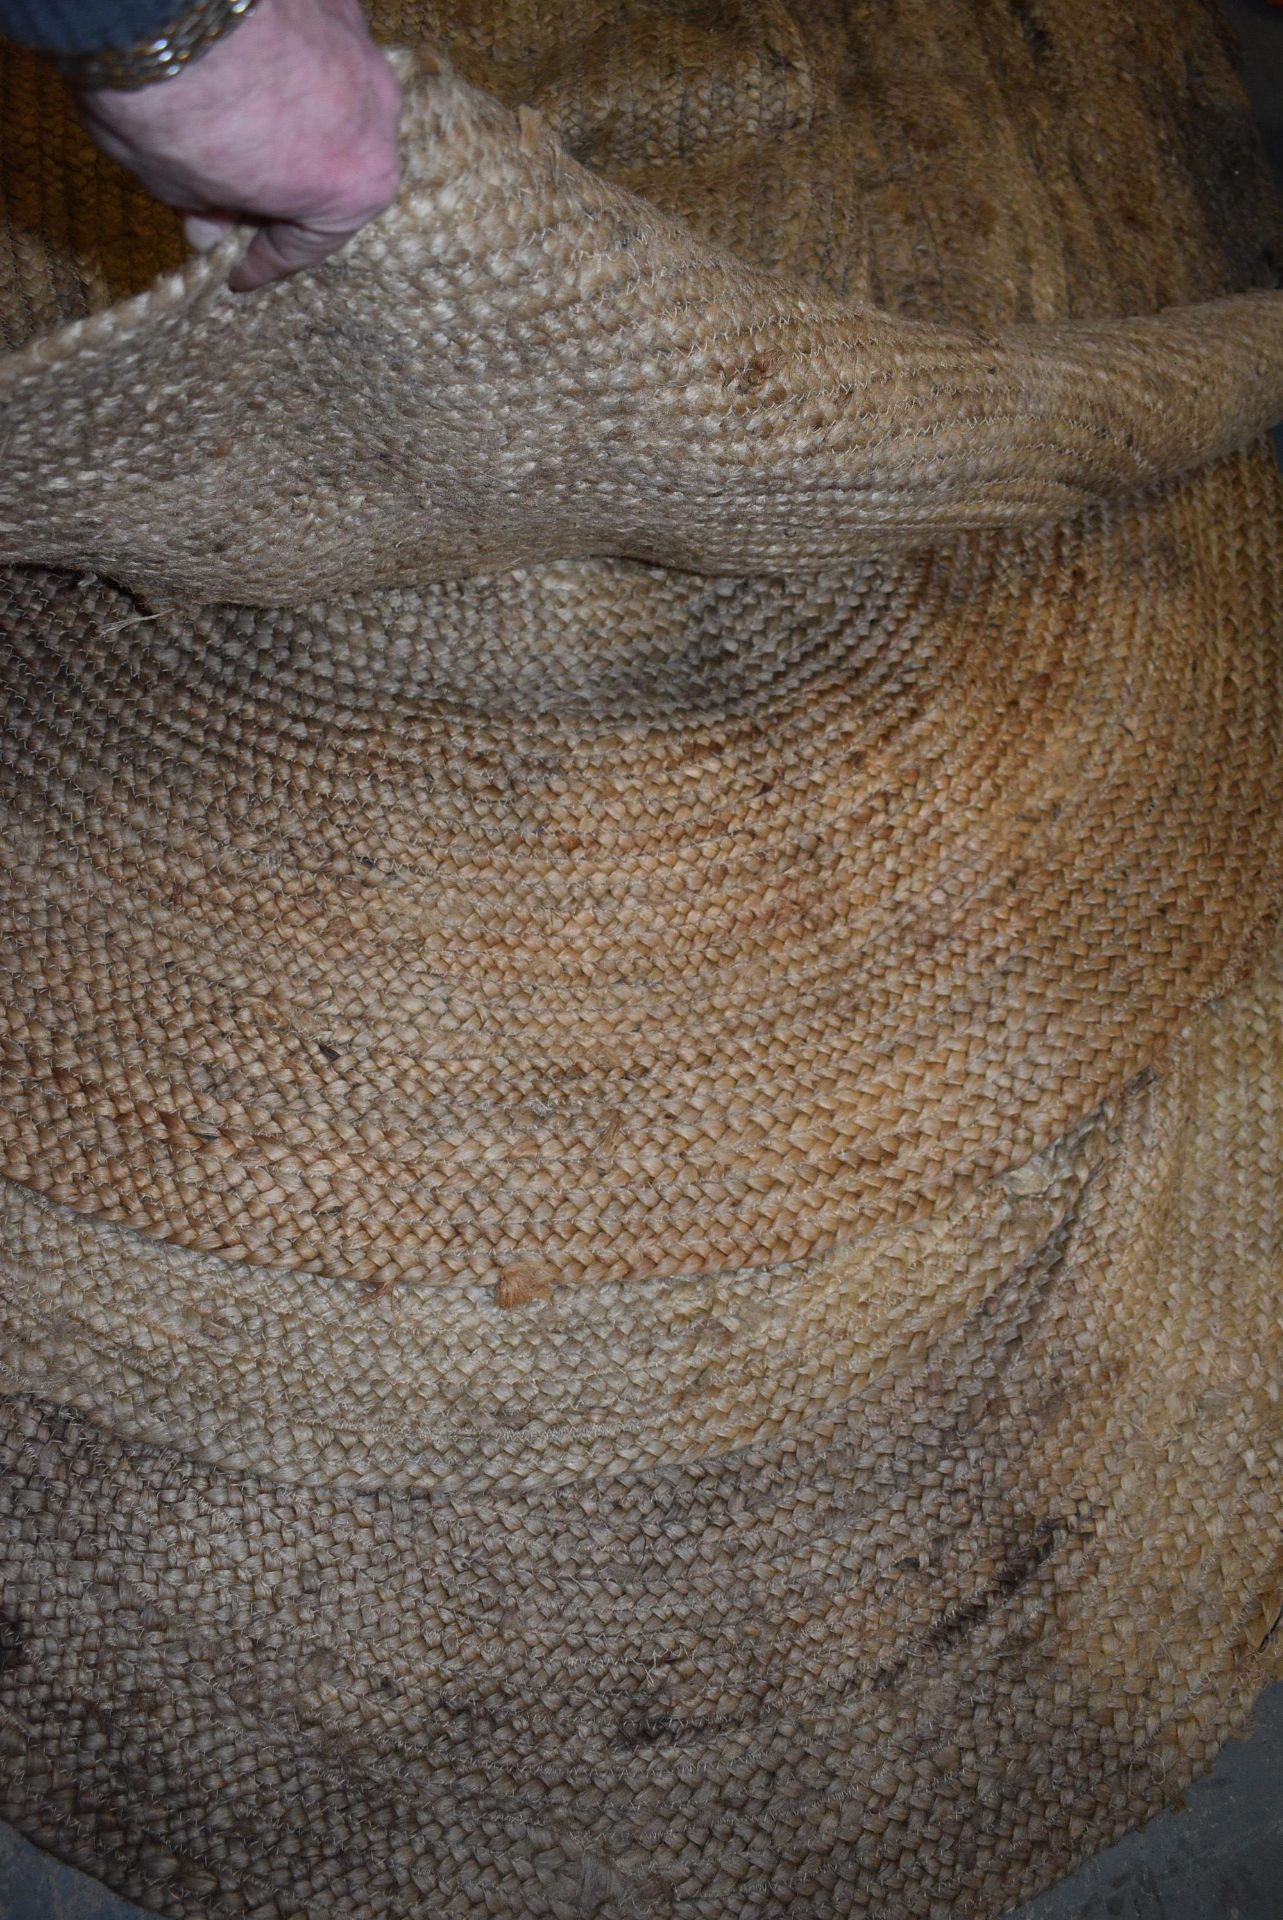 *Seven Natural Fibre Circular and Oval Rugs - Image 2 of 2